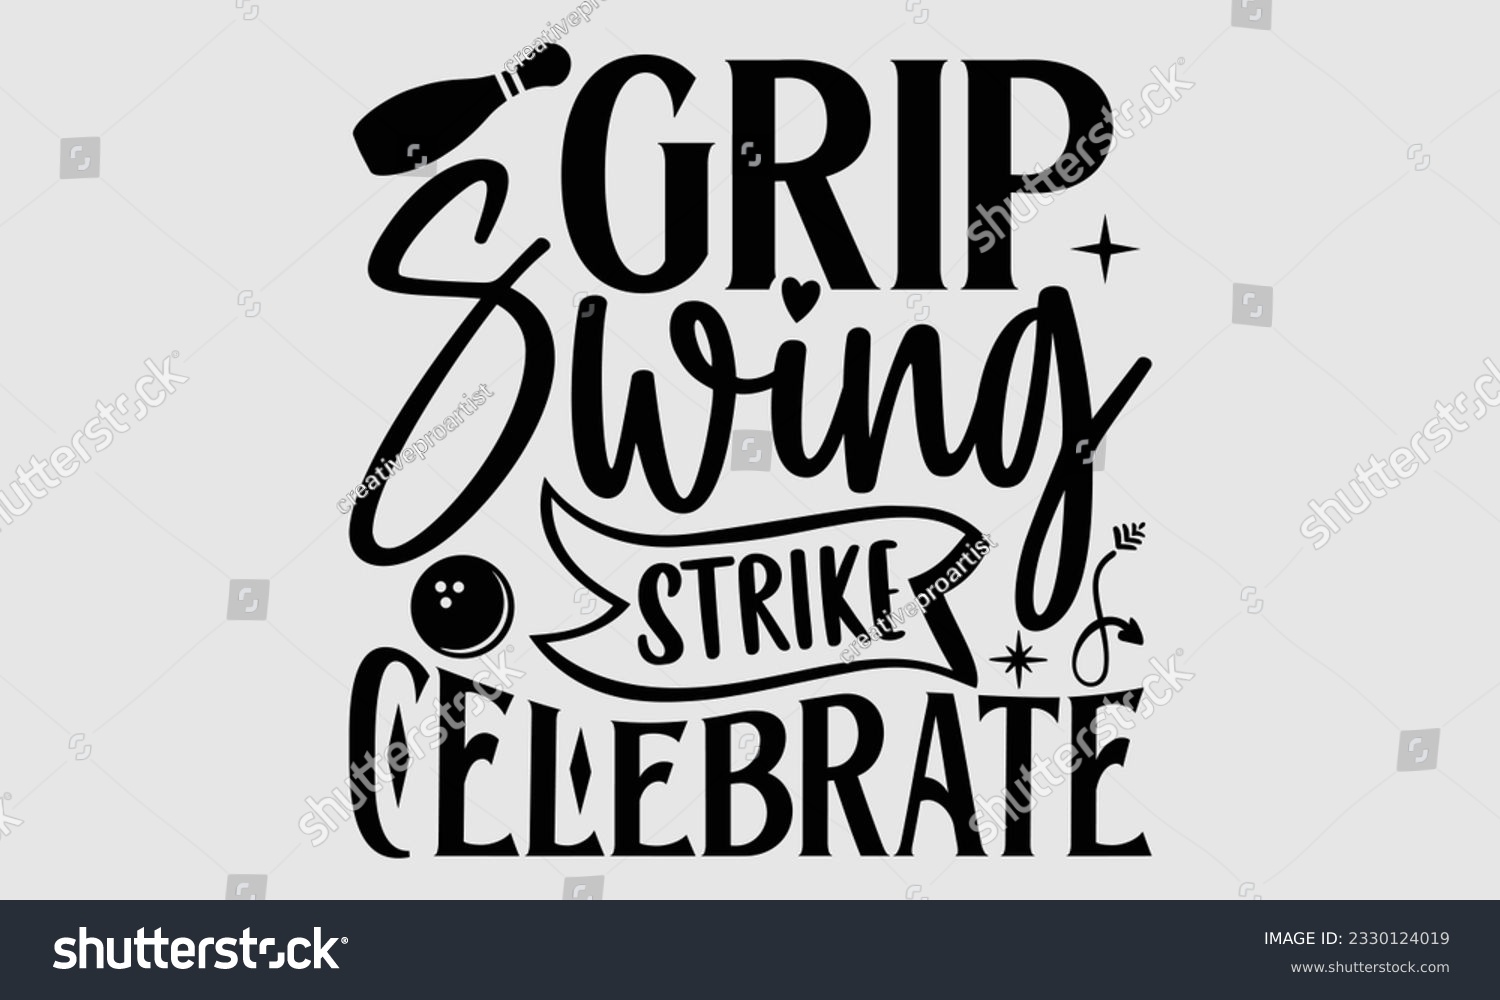 SVG of Grip Swing Strike Celebrate- Bowling t-shirt design, Illustration for prints on SVG and bags, posters, cards, greeting card template with typography text EPS svg